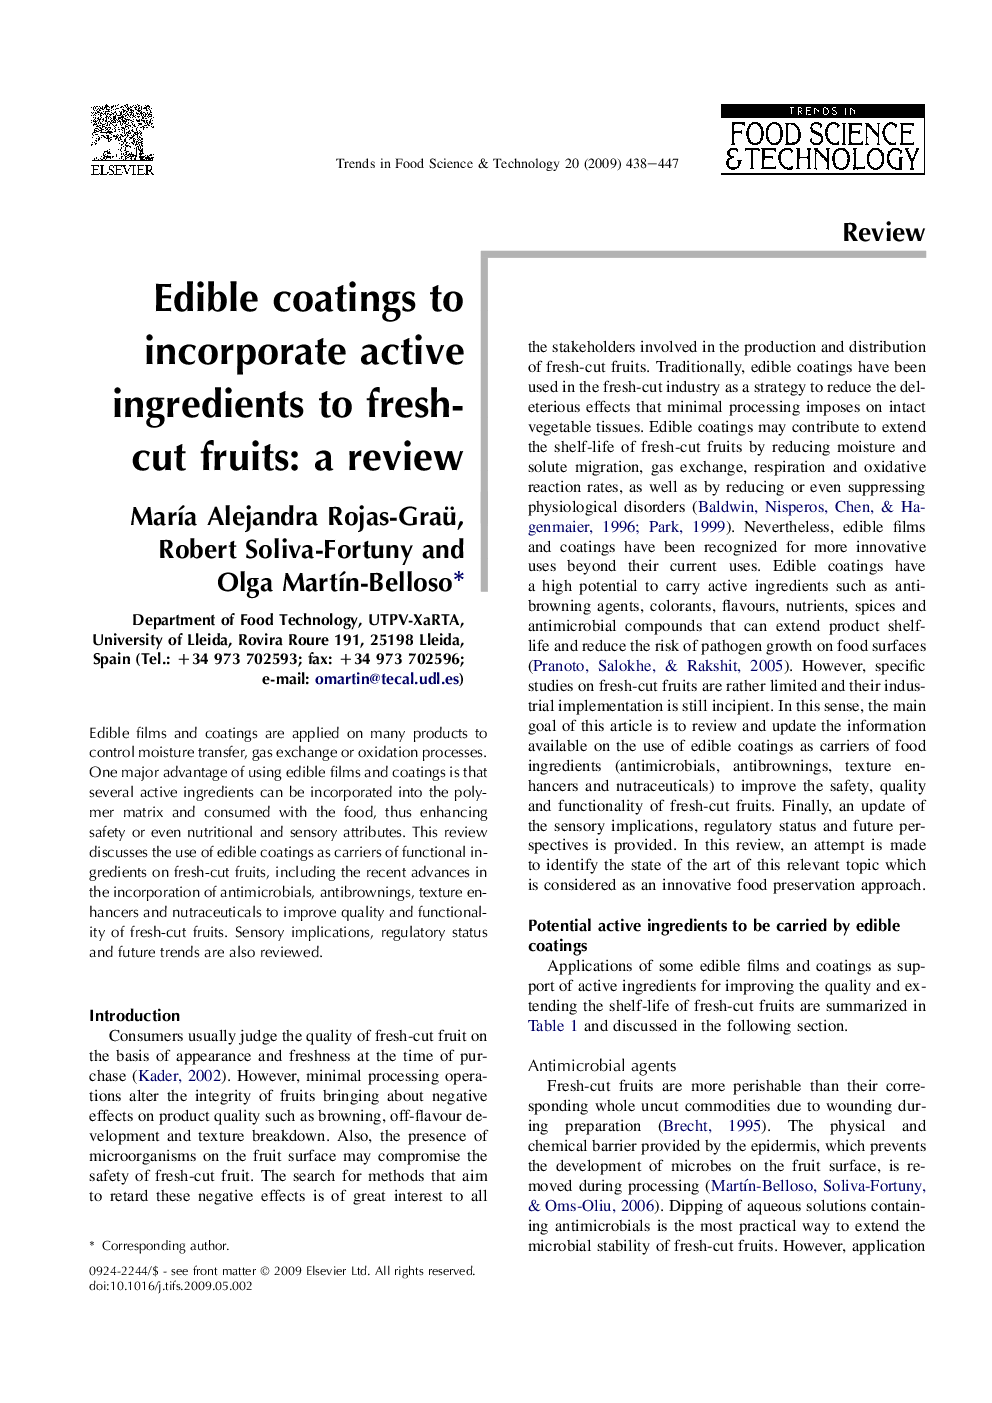 Edible coatings to incorporate active ingredients to fresh-cut fruits: a review